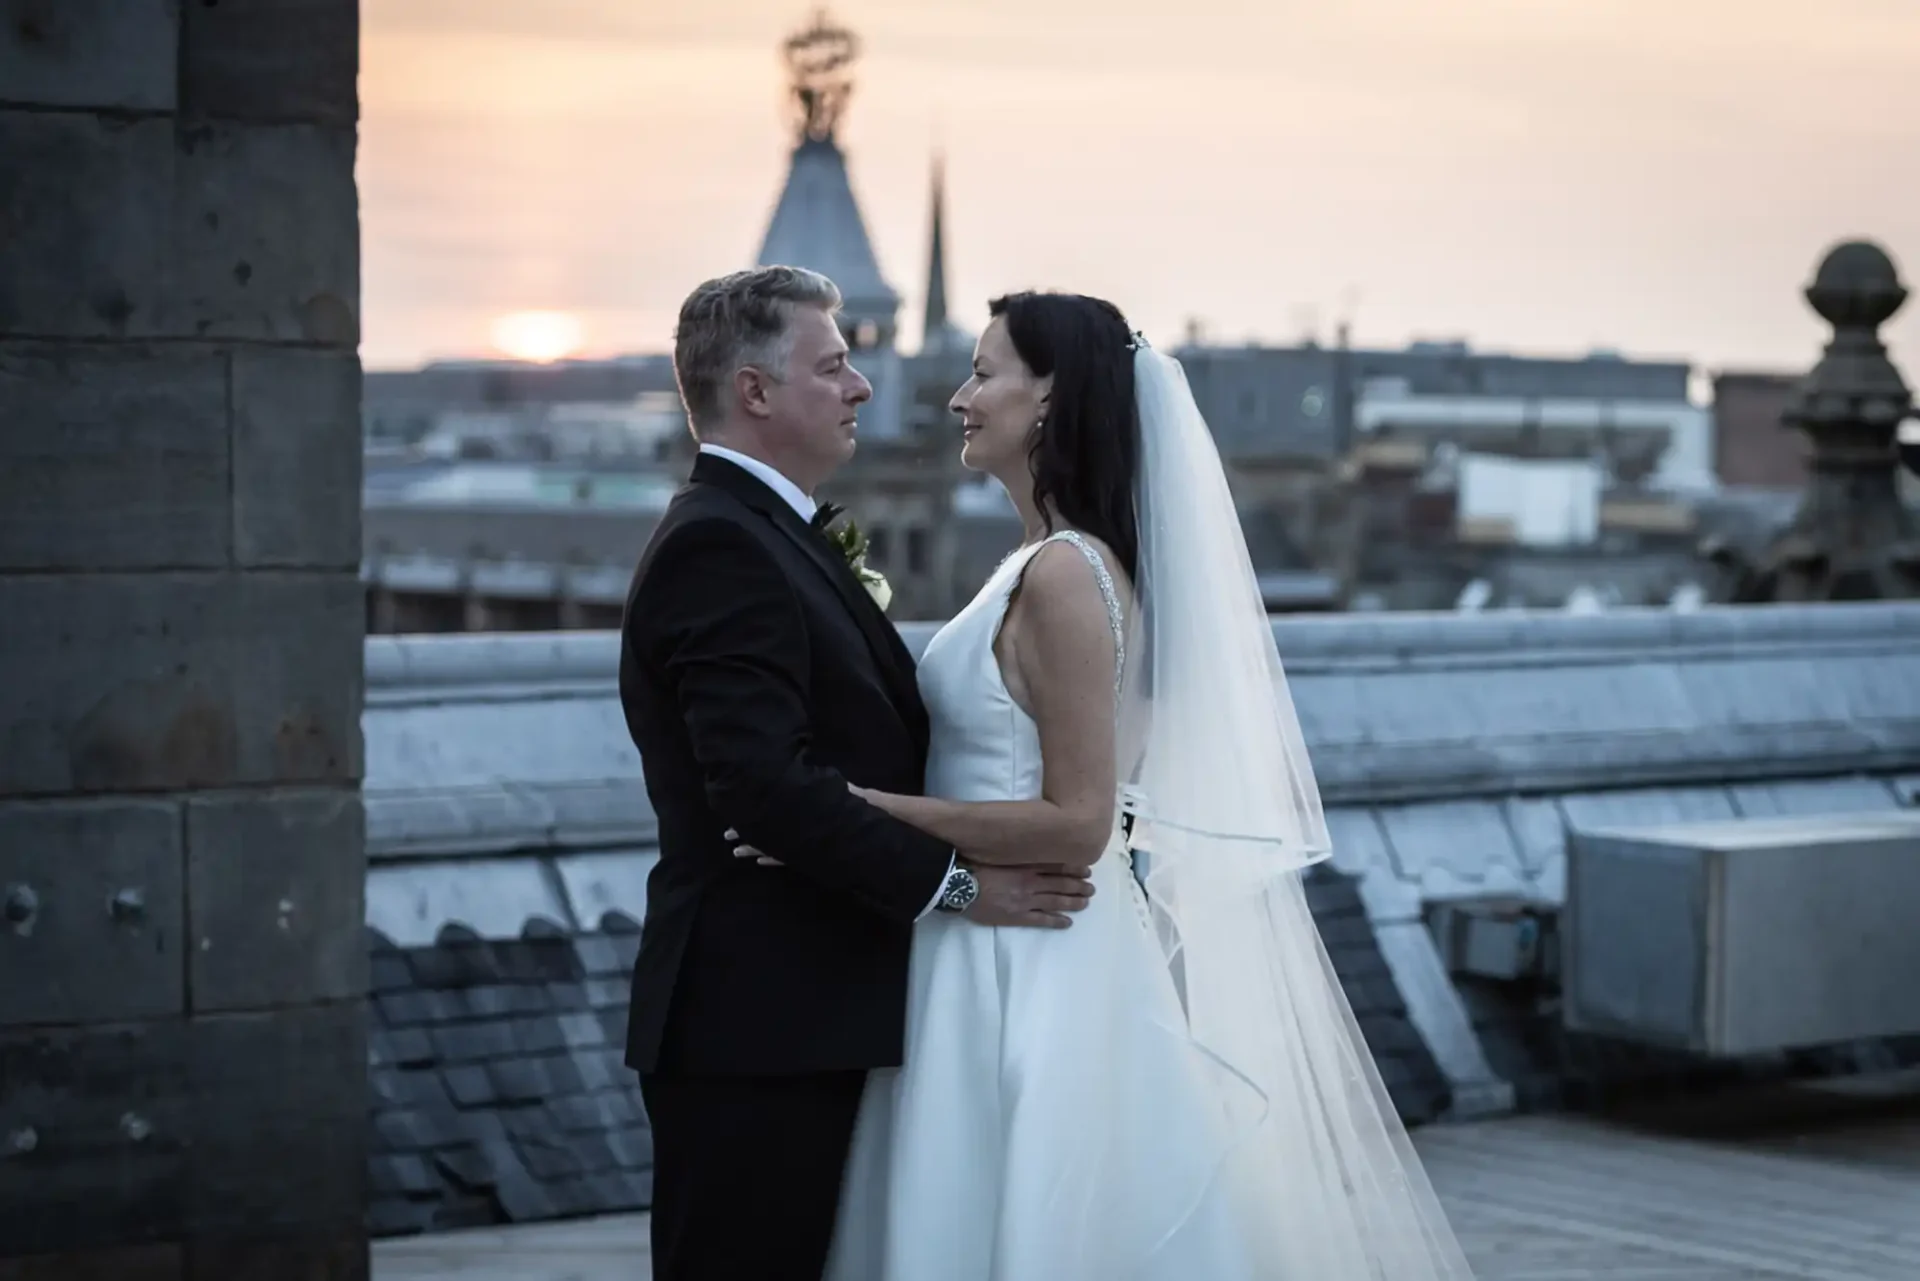 A bride and groom embrace on a rooftop at sunset, with city buildings in the background.